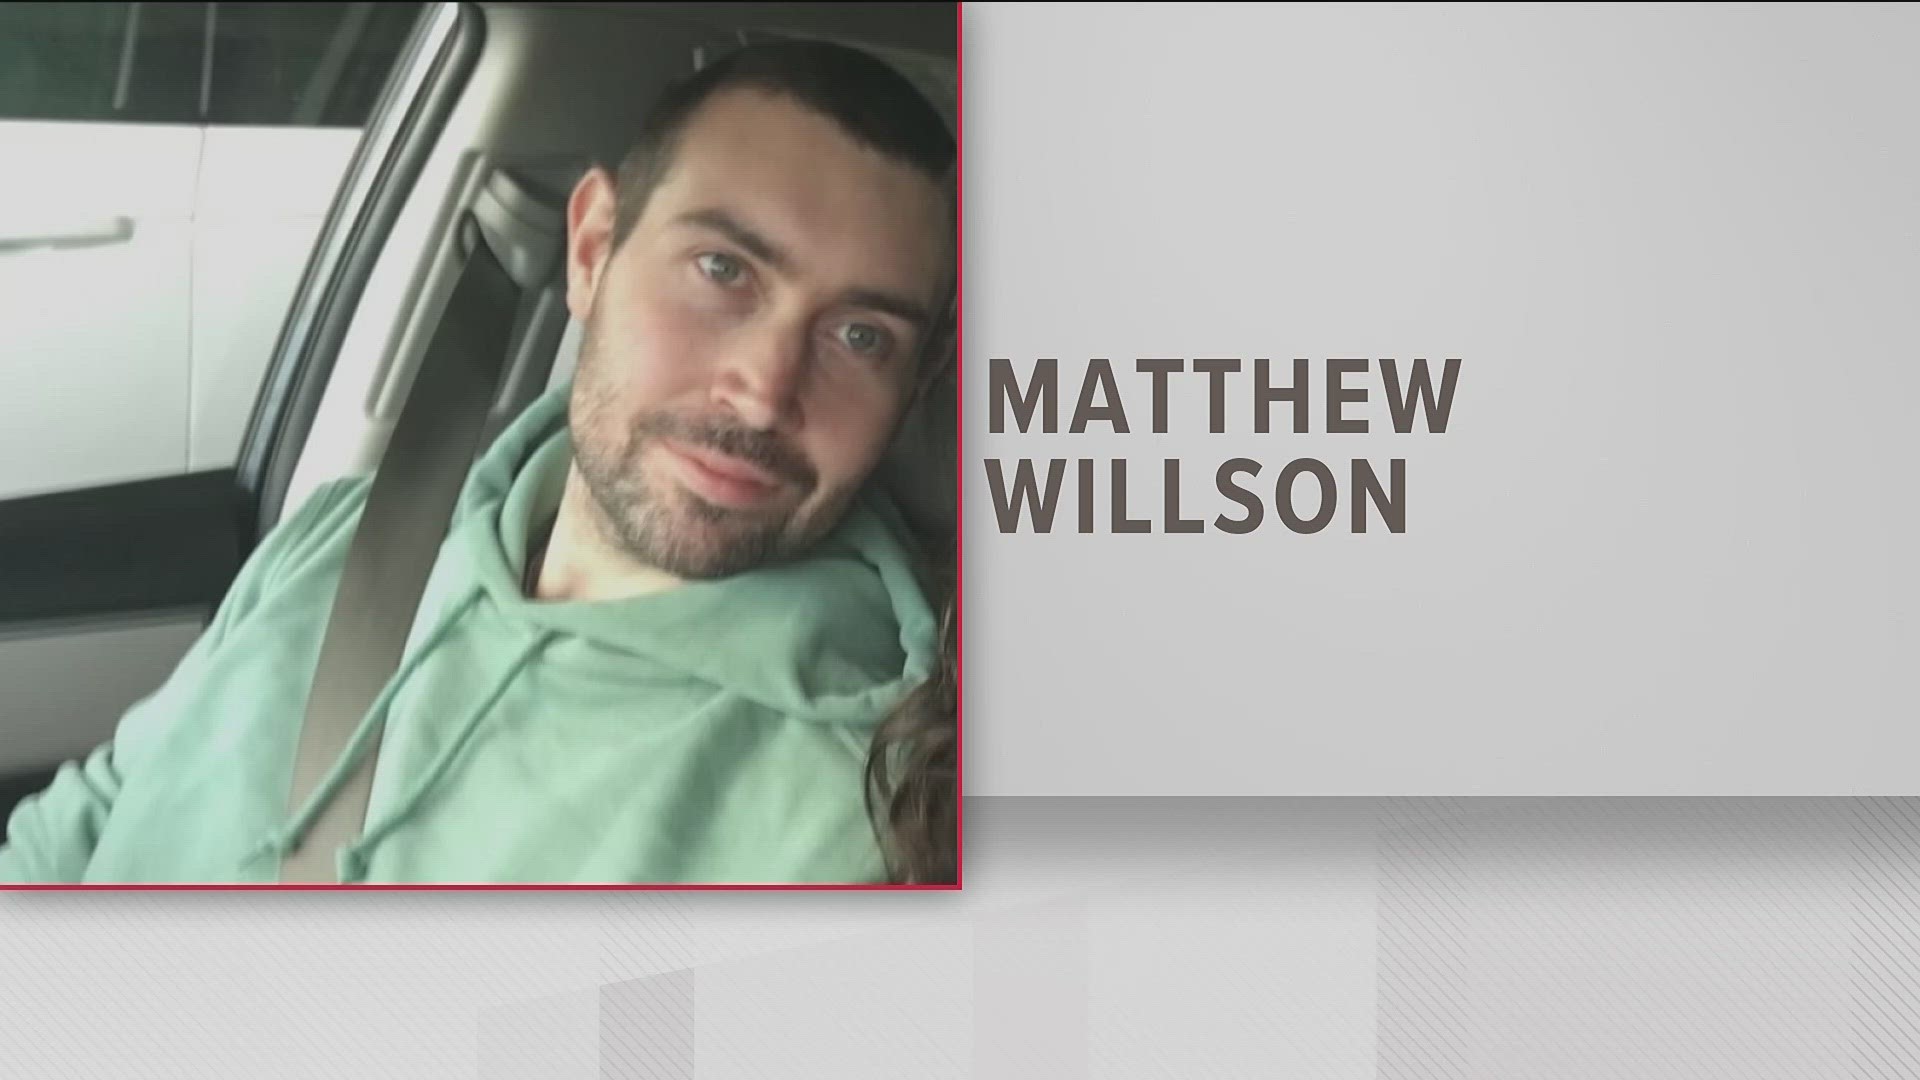 Dr. Matthew Willson was found with a single gunshot to the head, police said.